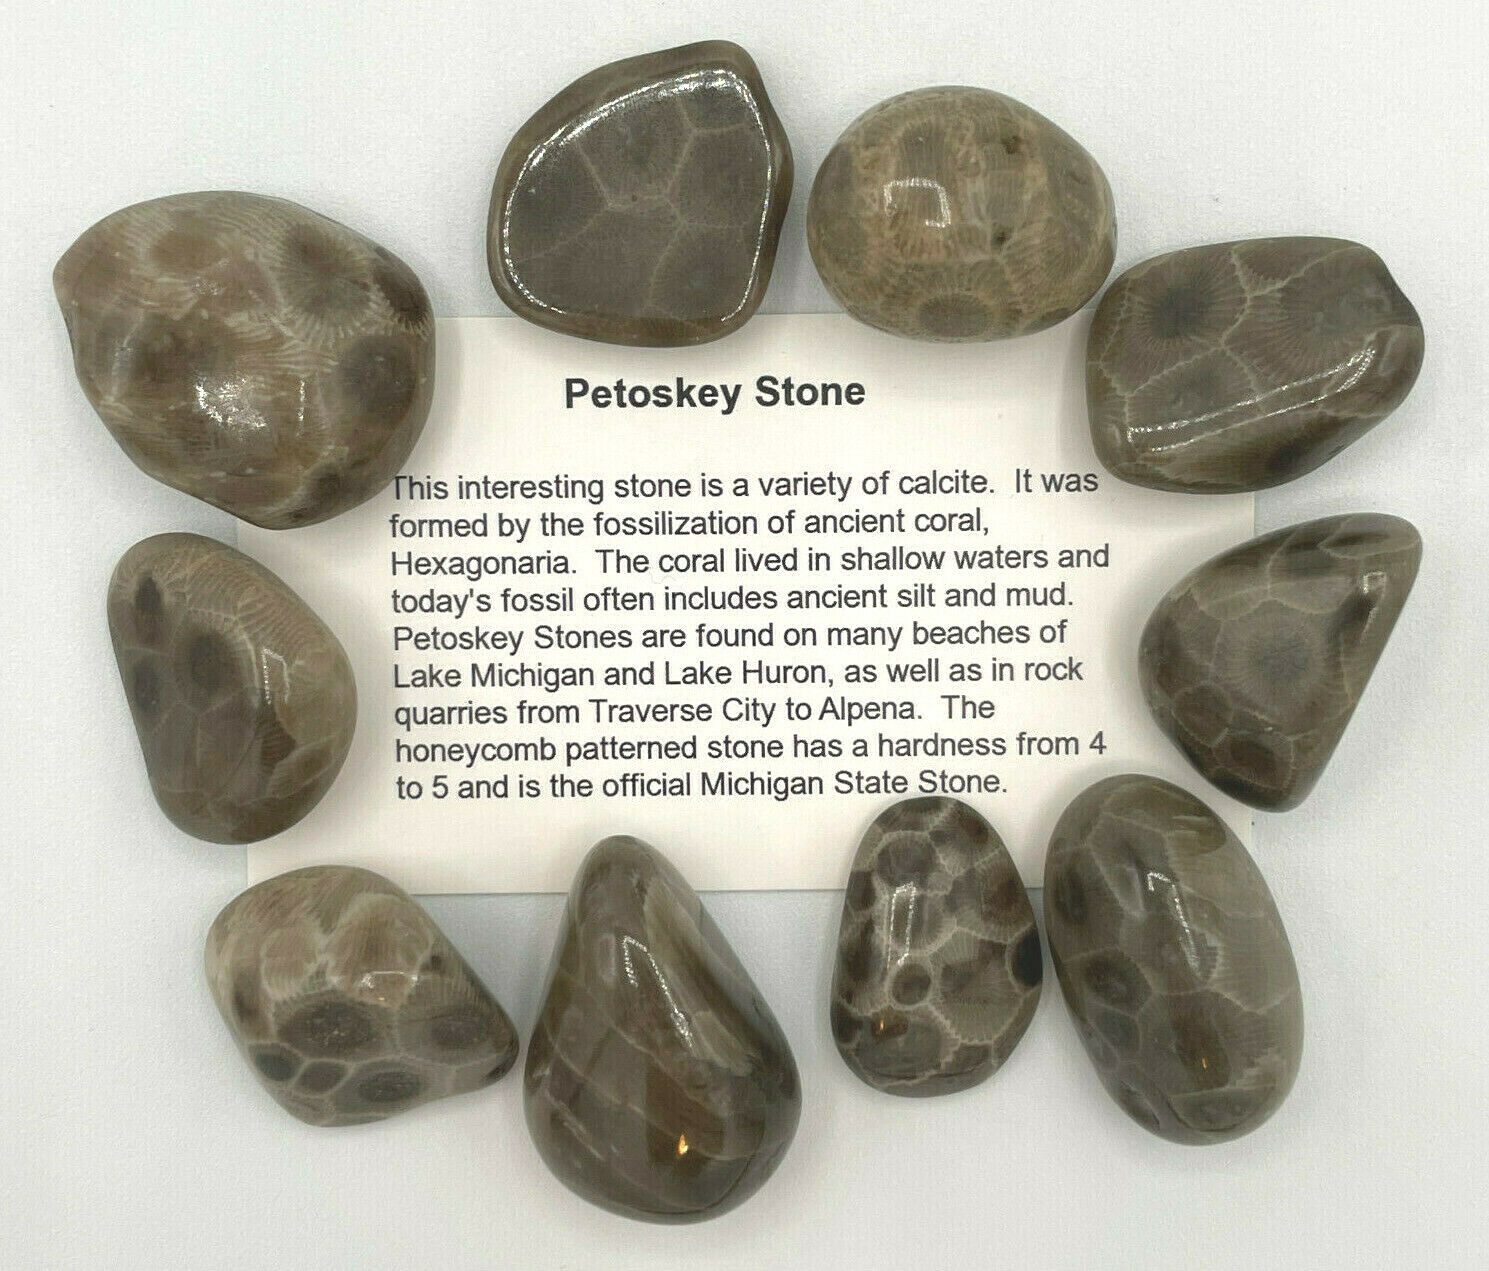 A SET OF 4 PETOSKEY STONES - GREAT PRICE INCLUDES FREE SHIPPING! Без бренда - фотография #6